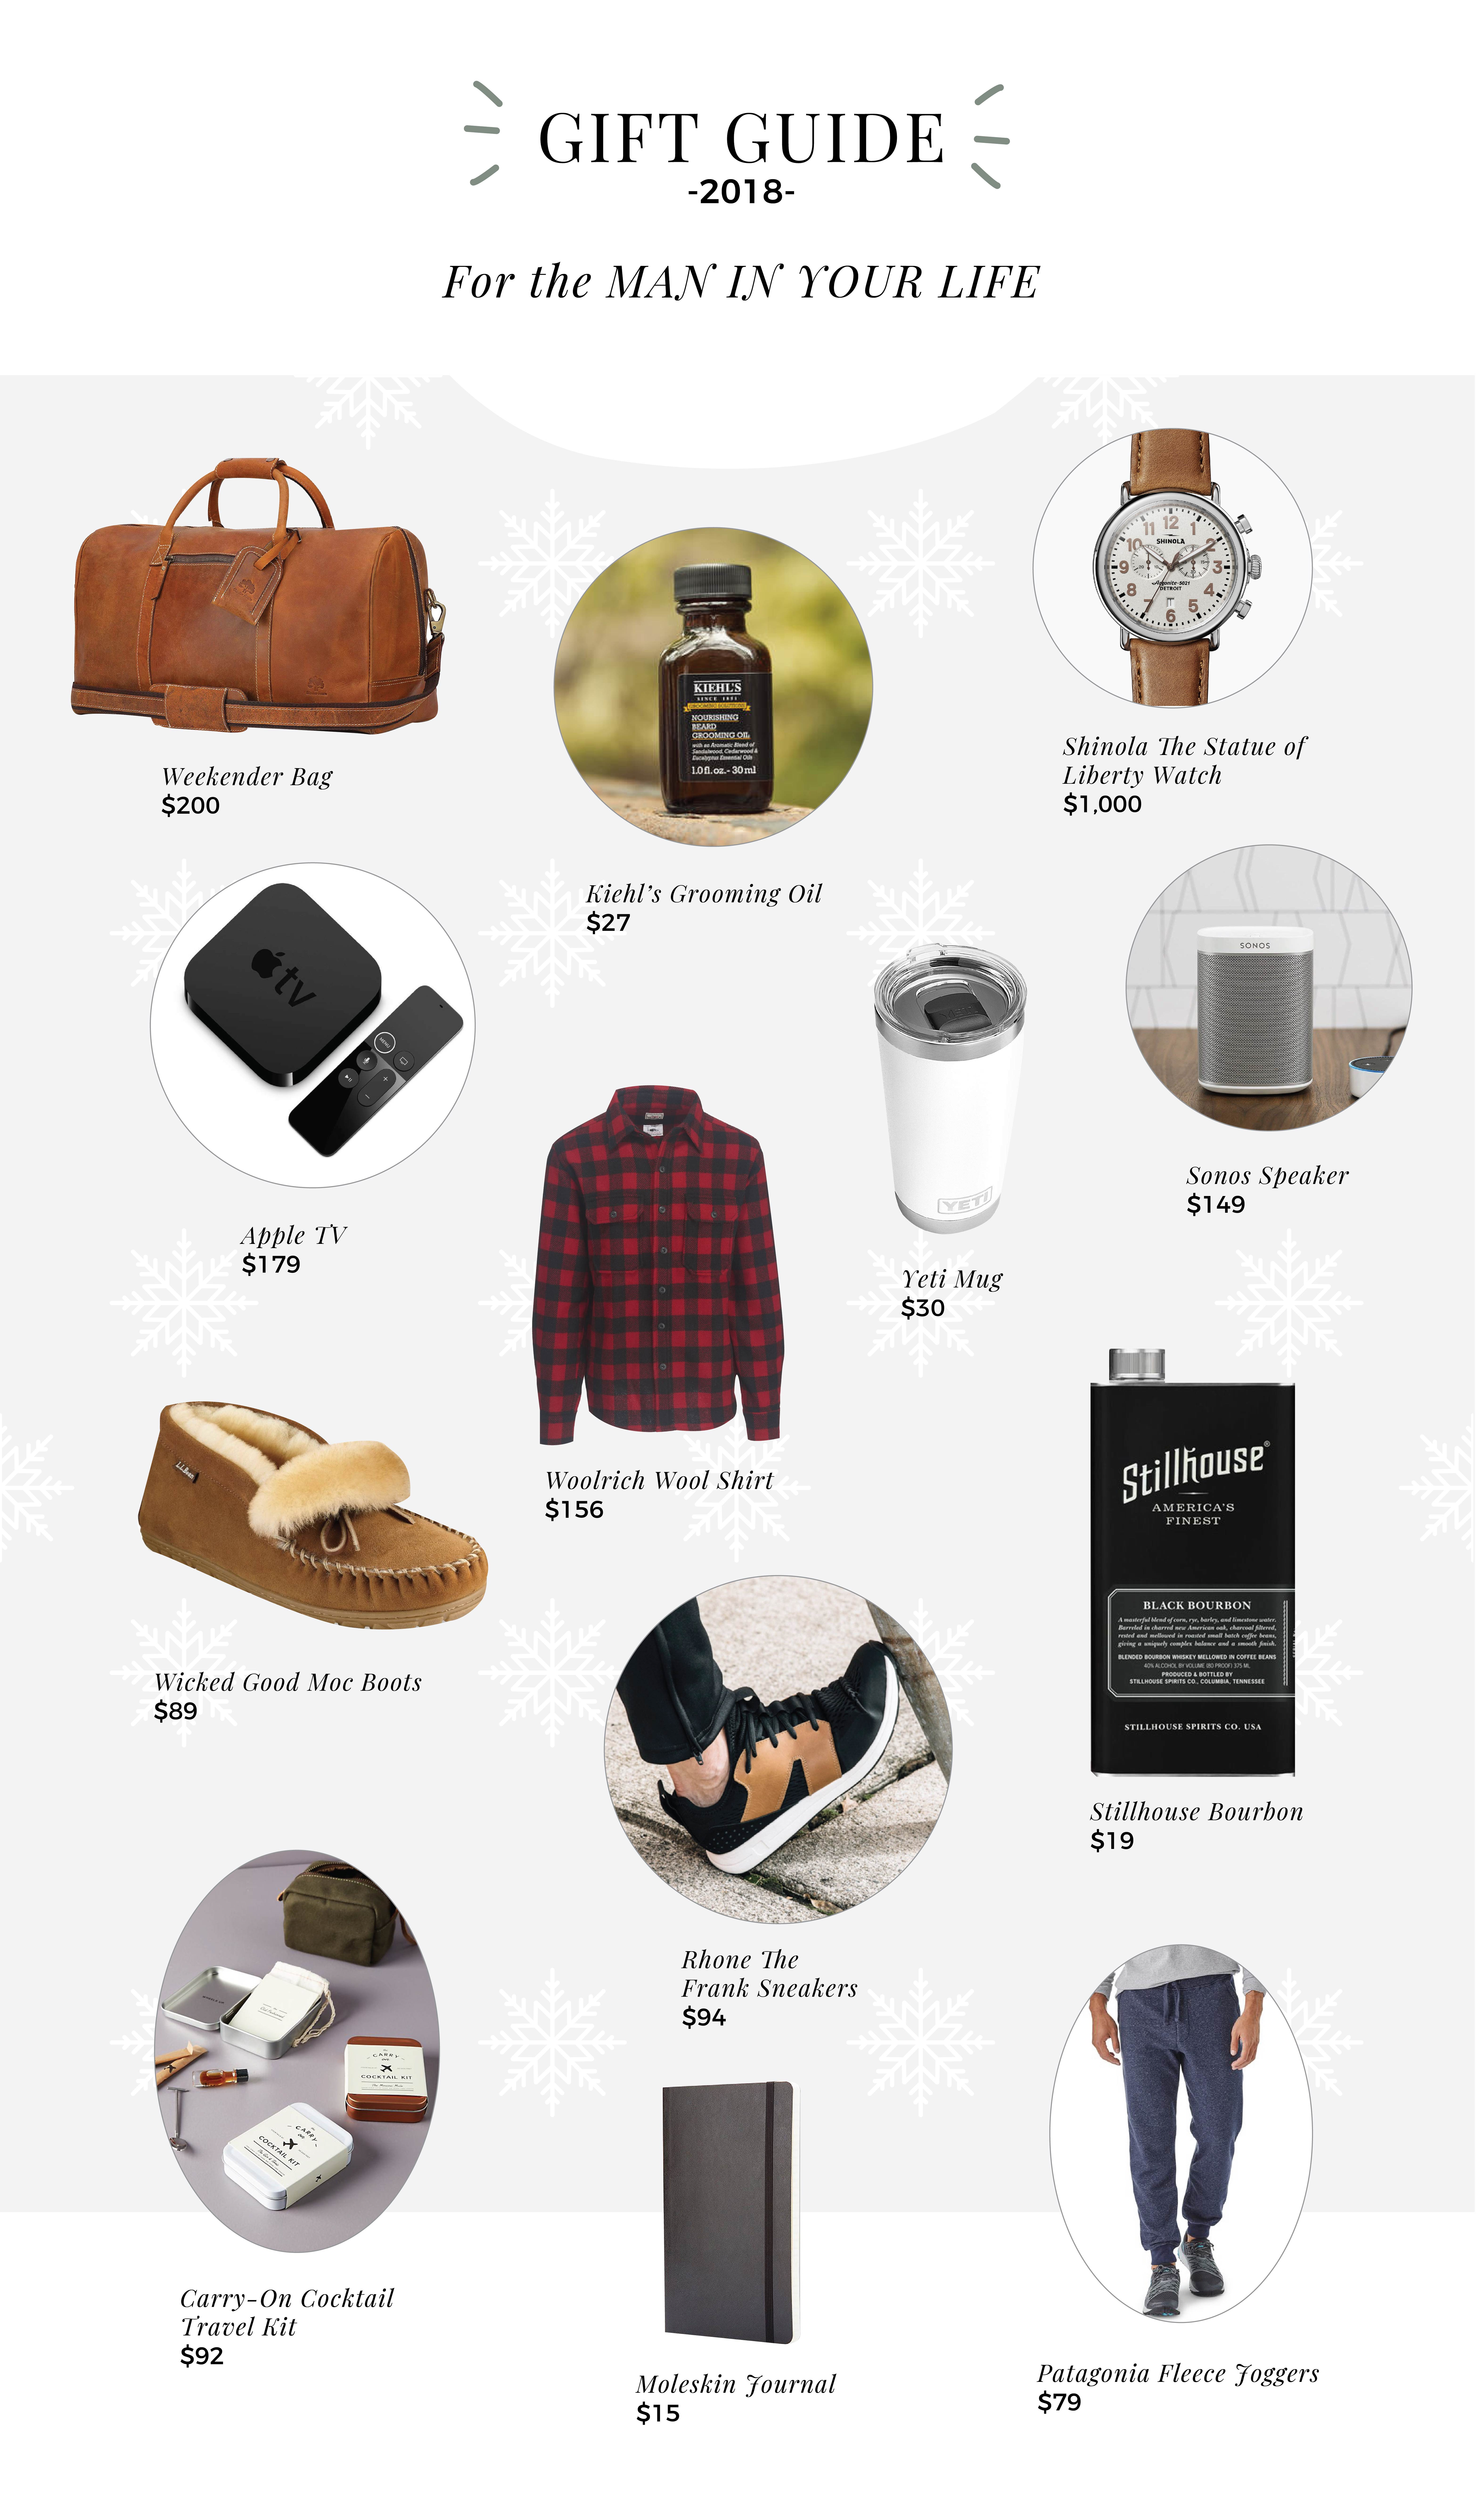 The 2018 Holiday Gift Guide: For the Man in Your Life is filled with goodies for your dad, friend, or significant other!